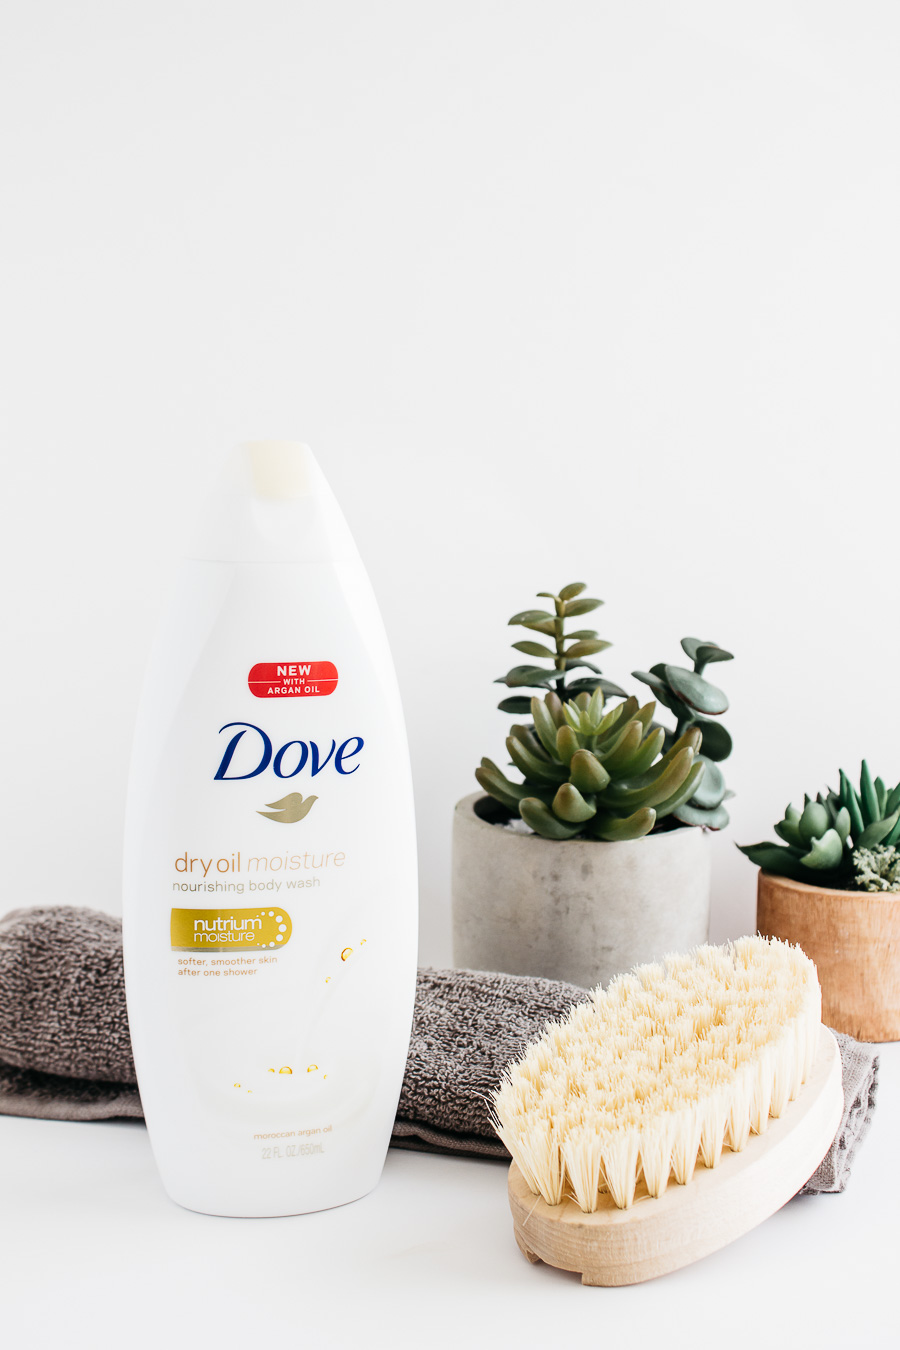 Dove Body Wash3 6 Best-Selling Women's Beauty Products - 9